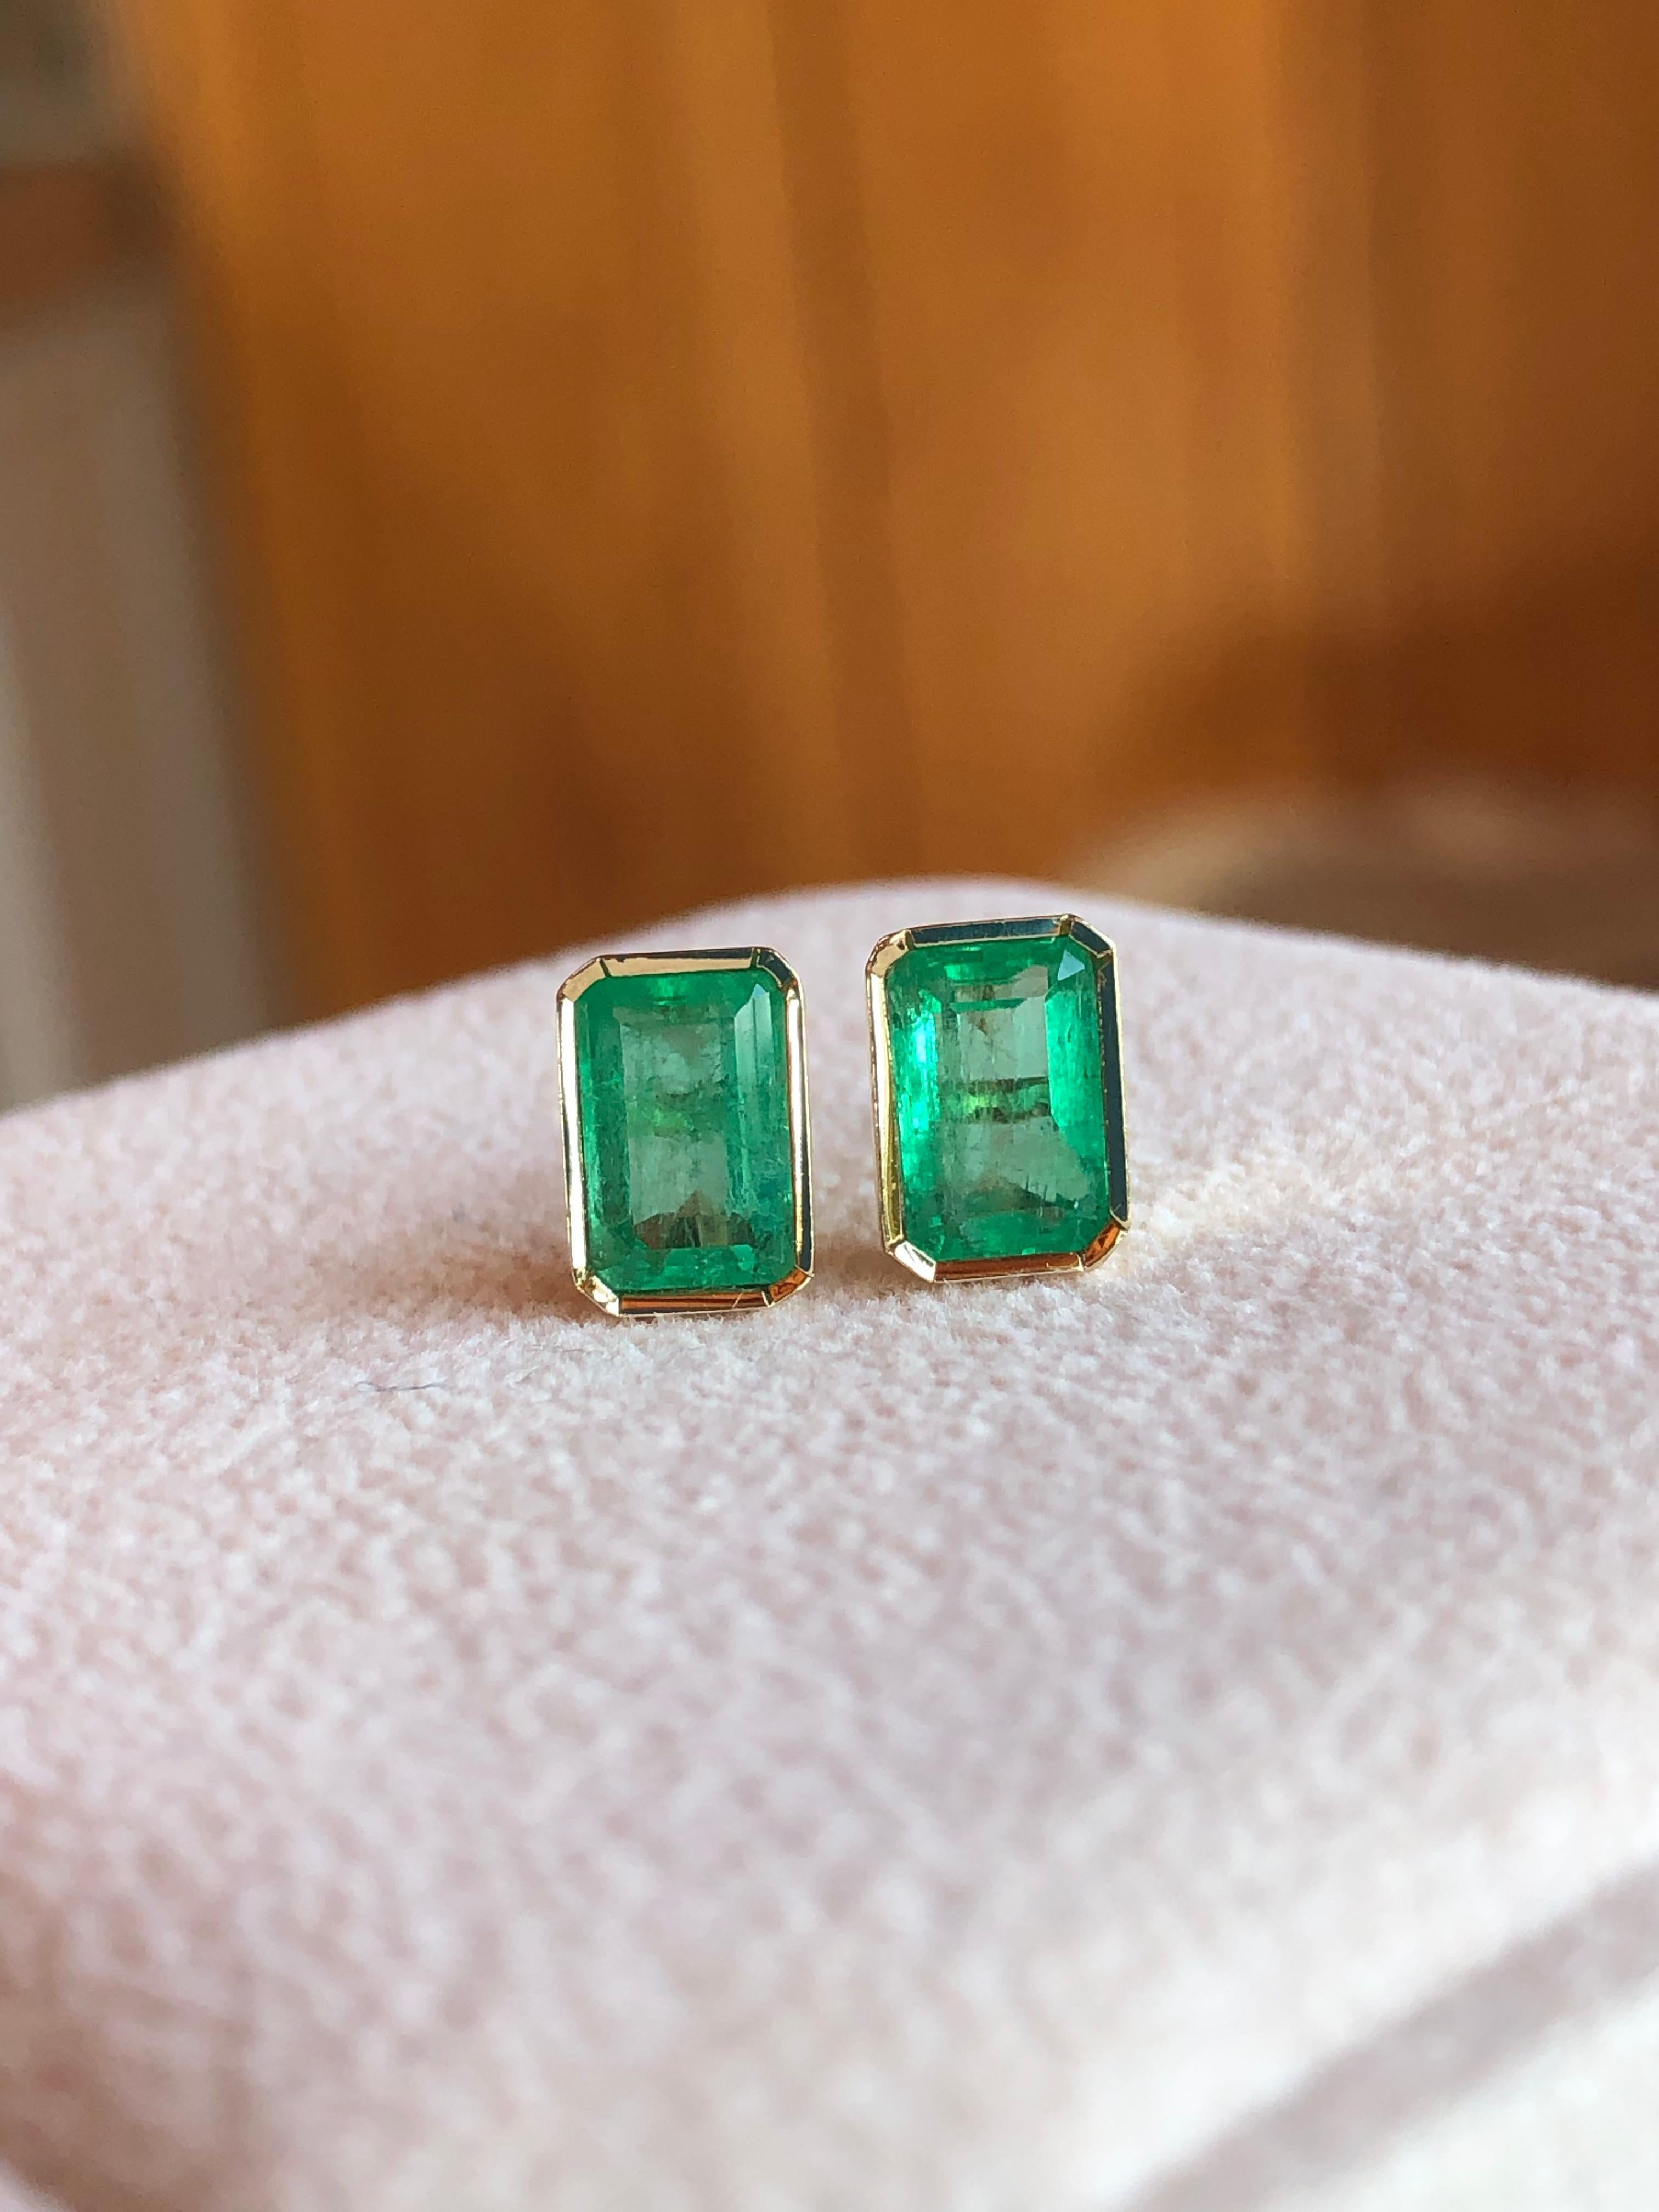 Stylish and great for everyday wear natural Colombian emerald stud earrings 18 Karat yellow gold, stunning vibrant green color!!!
Primary Stones: 100% Natural Colombian Emeralds
Color/Clarity: FINE Medium Green Color/ Clarity, VS
Total Gemstones